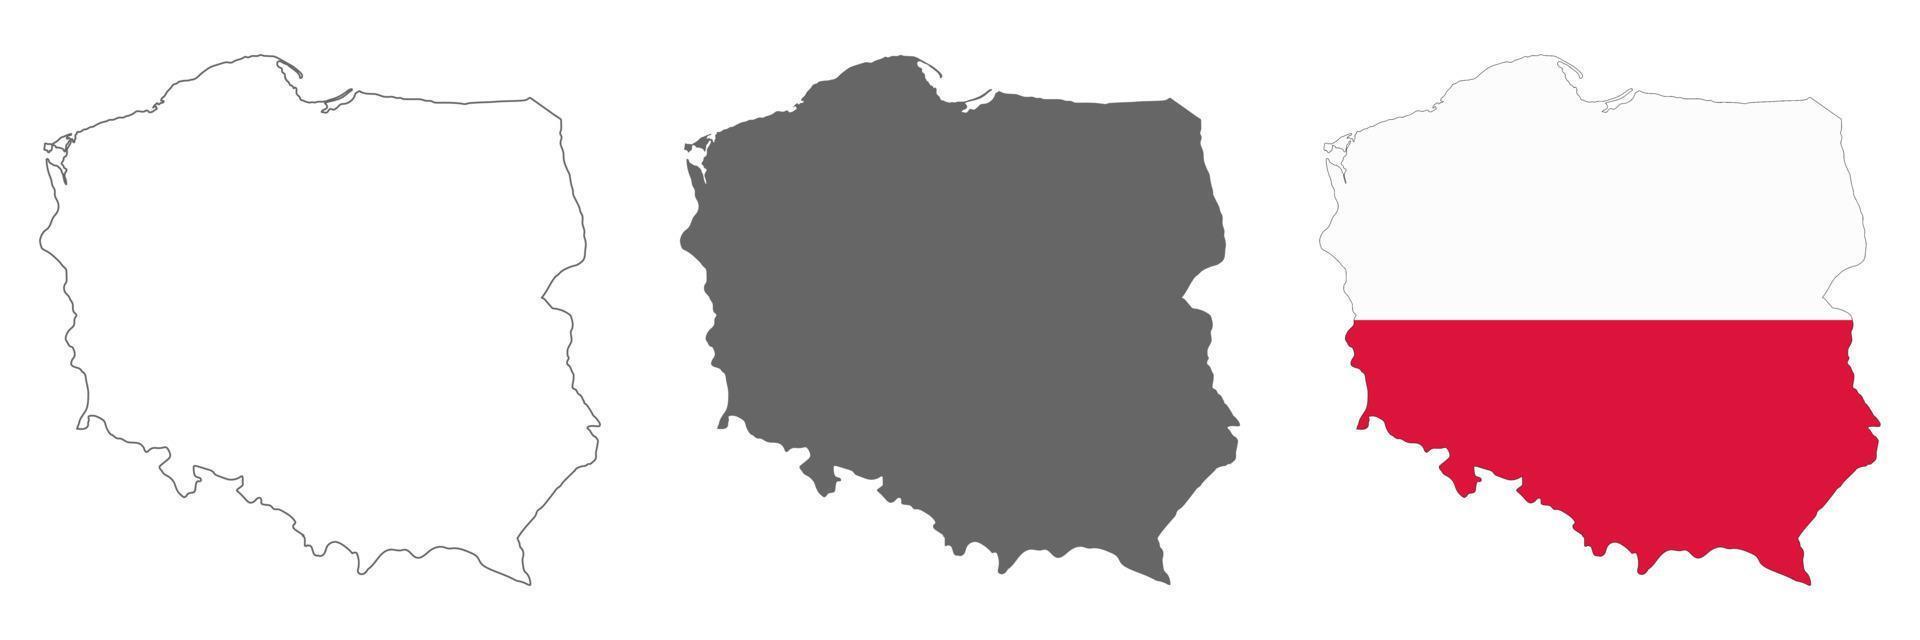 Highly detailed Poland map with borders isolated on background vector